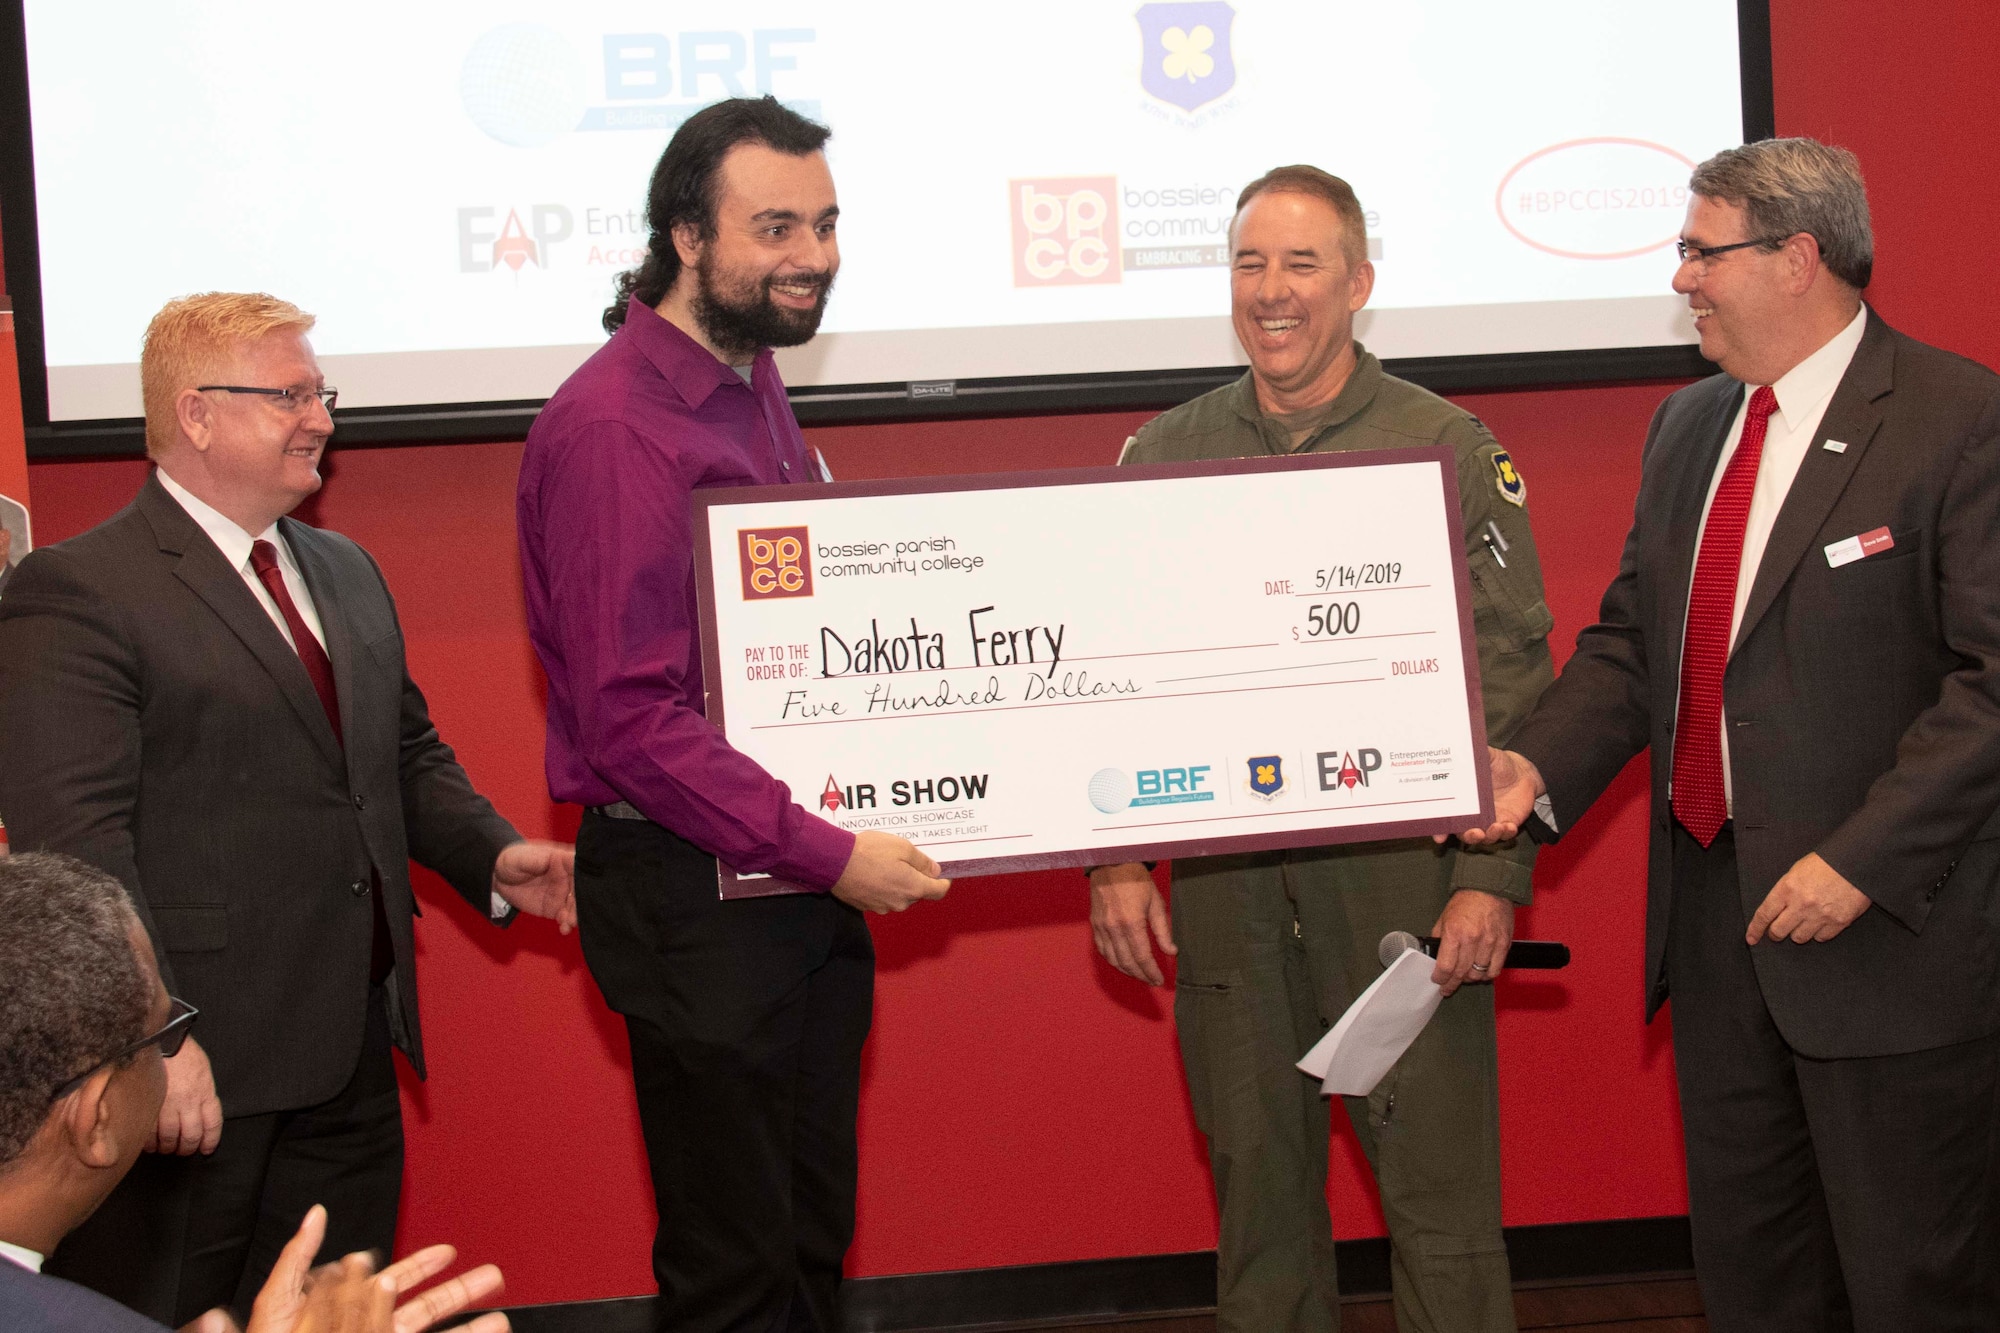 Dr. Rick Bateman,Jr., Bossier Parish Community College chancellor, U.S. Air Force Col. Steven Kirkpatrick, 307th Bomb Wing commander, and Dave Smith, Entrepreneurial Accelerator Program executive director, present Dakota Ferry with a check in Bossier City, La., May 14, 2019.  Ferry, a BPCC student, won first place in the 2-Minute Drill, a contest for budding entrepreneurs co-sponsored by the 307th Bomb Wing.  The presentation was part of the inaugural AirShow Innovation Showcase, an event highlight achievments of innovative business that utilized the EAP as a resource. (U.S. Air Force photo by Master Sgt. Ted Daigle )